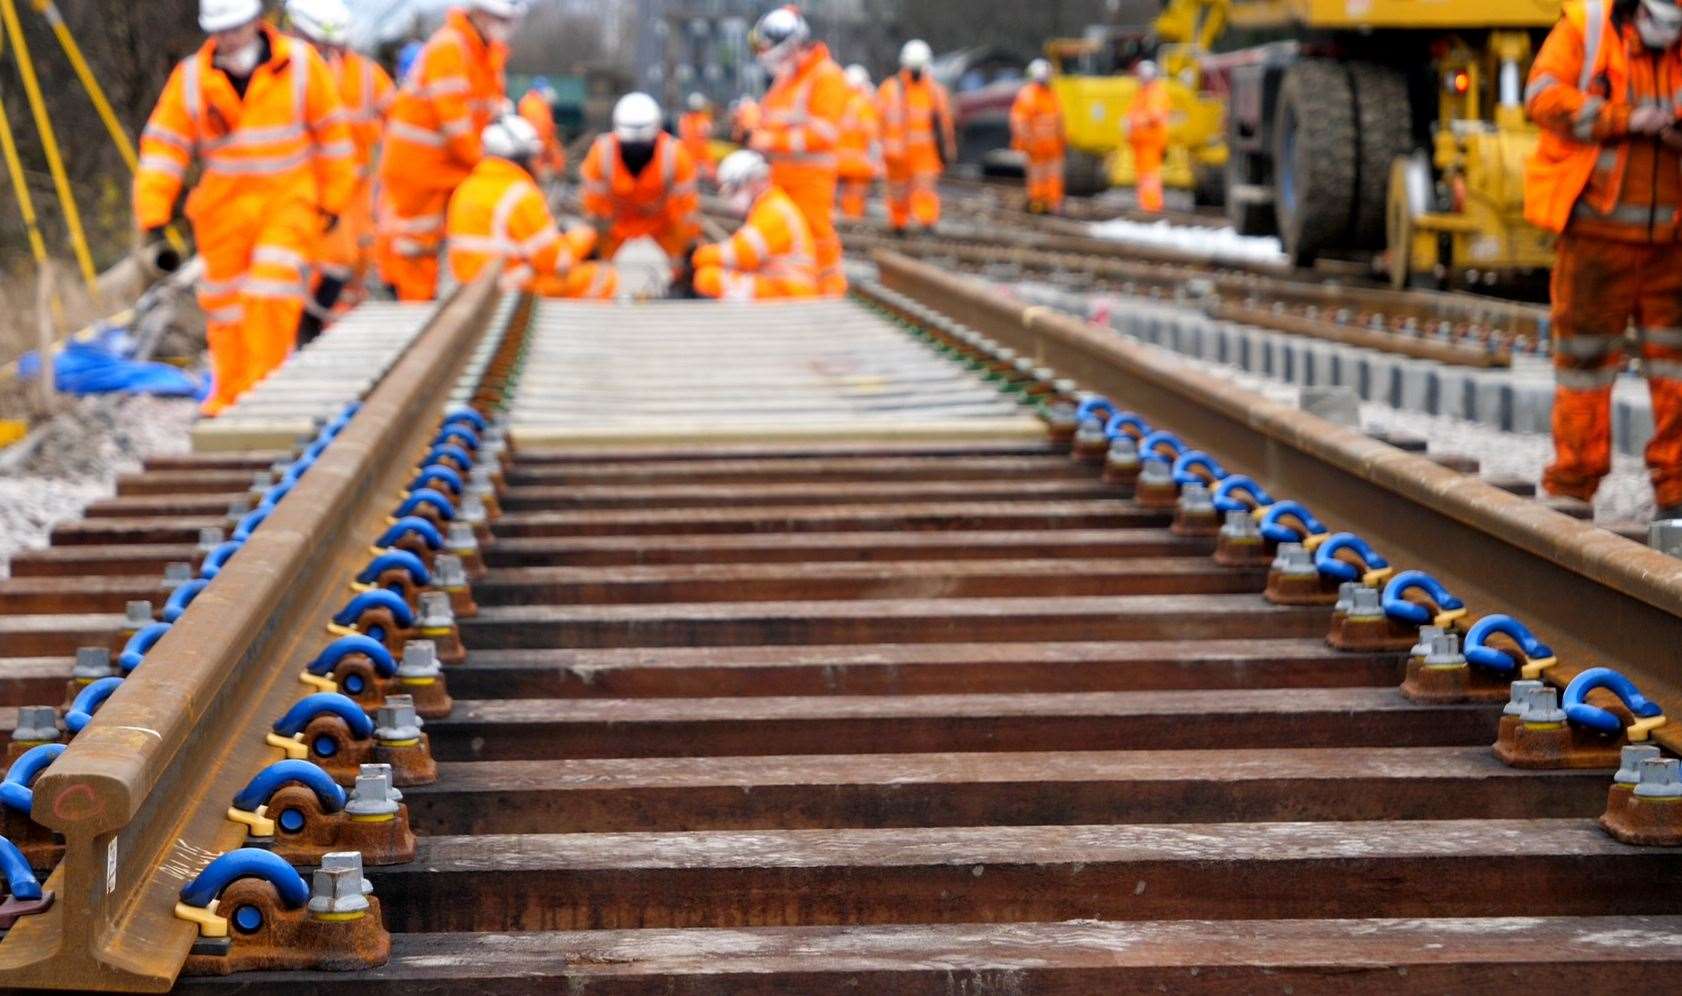 Network Rail engineers will fix the line